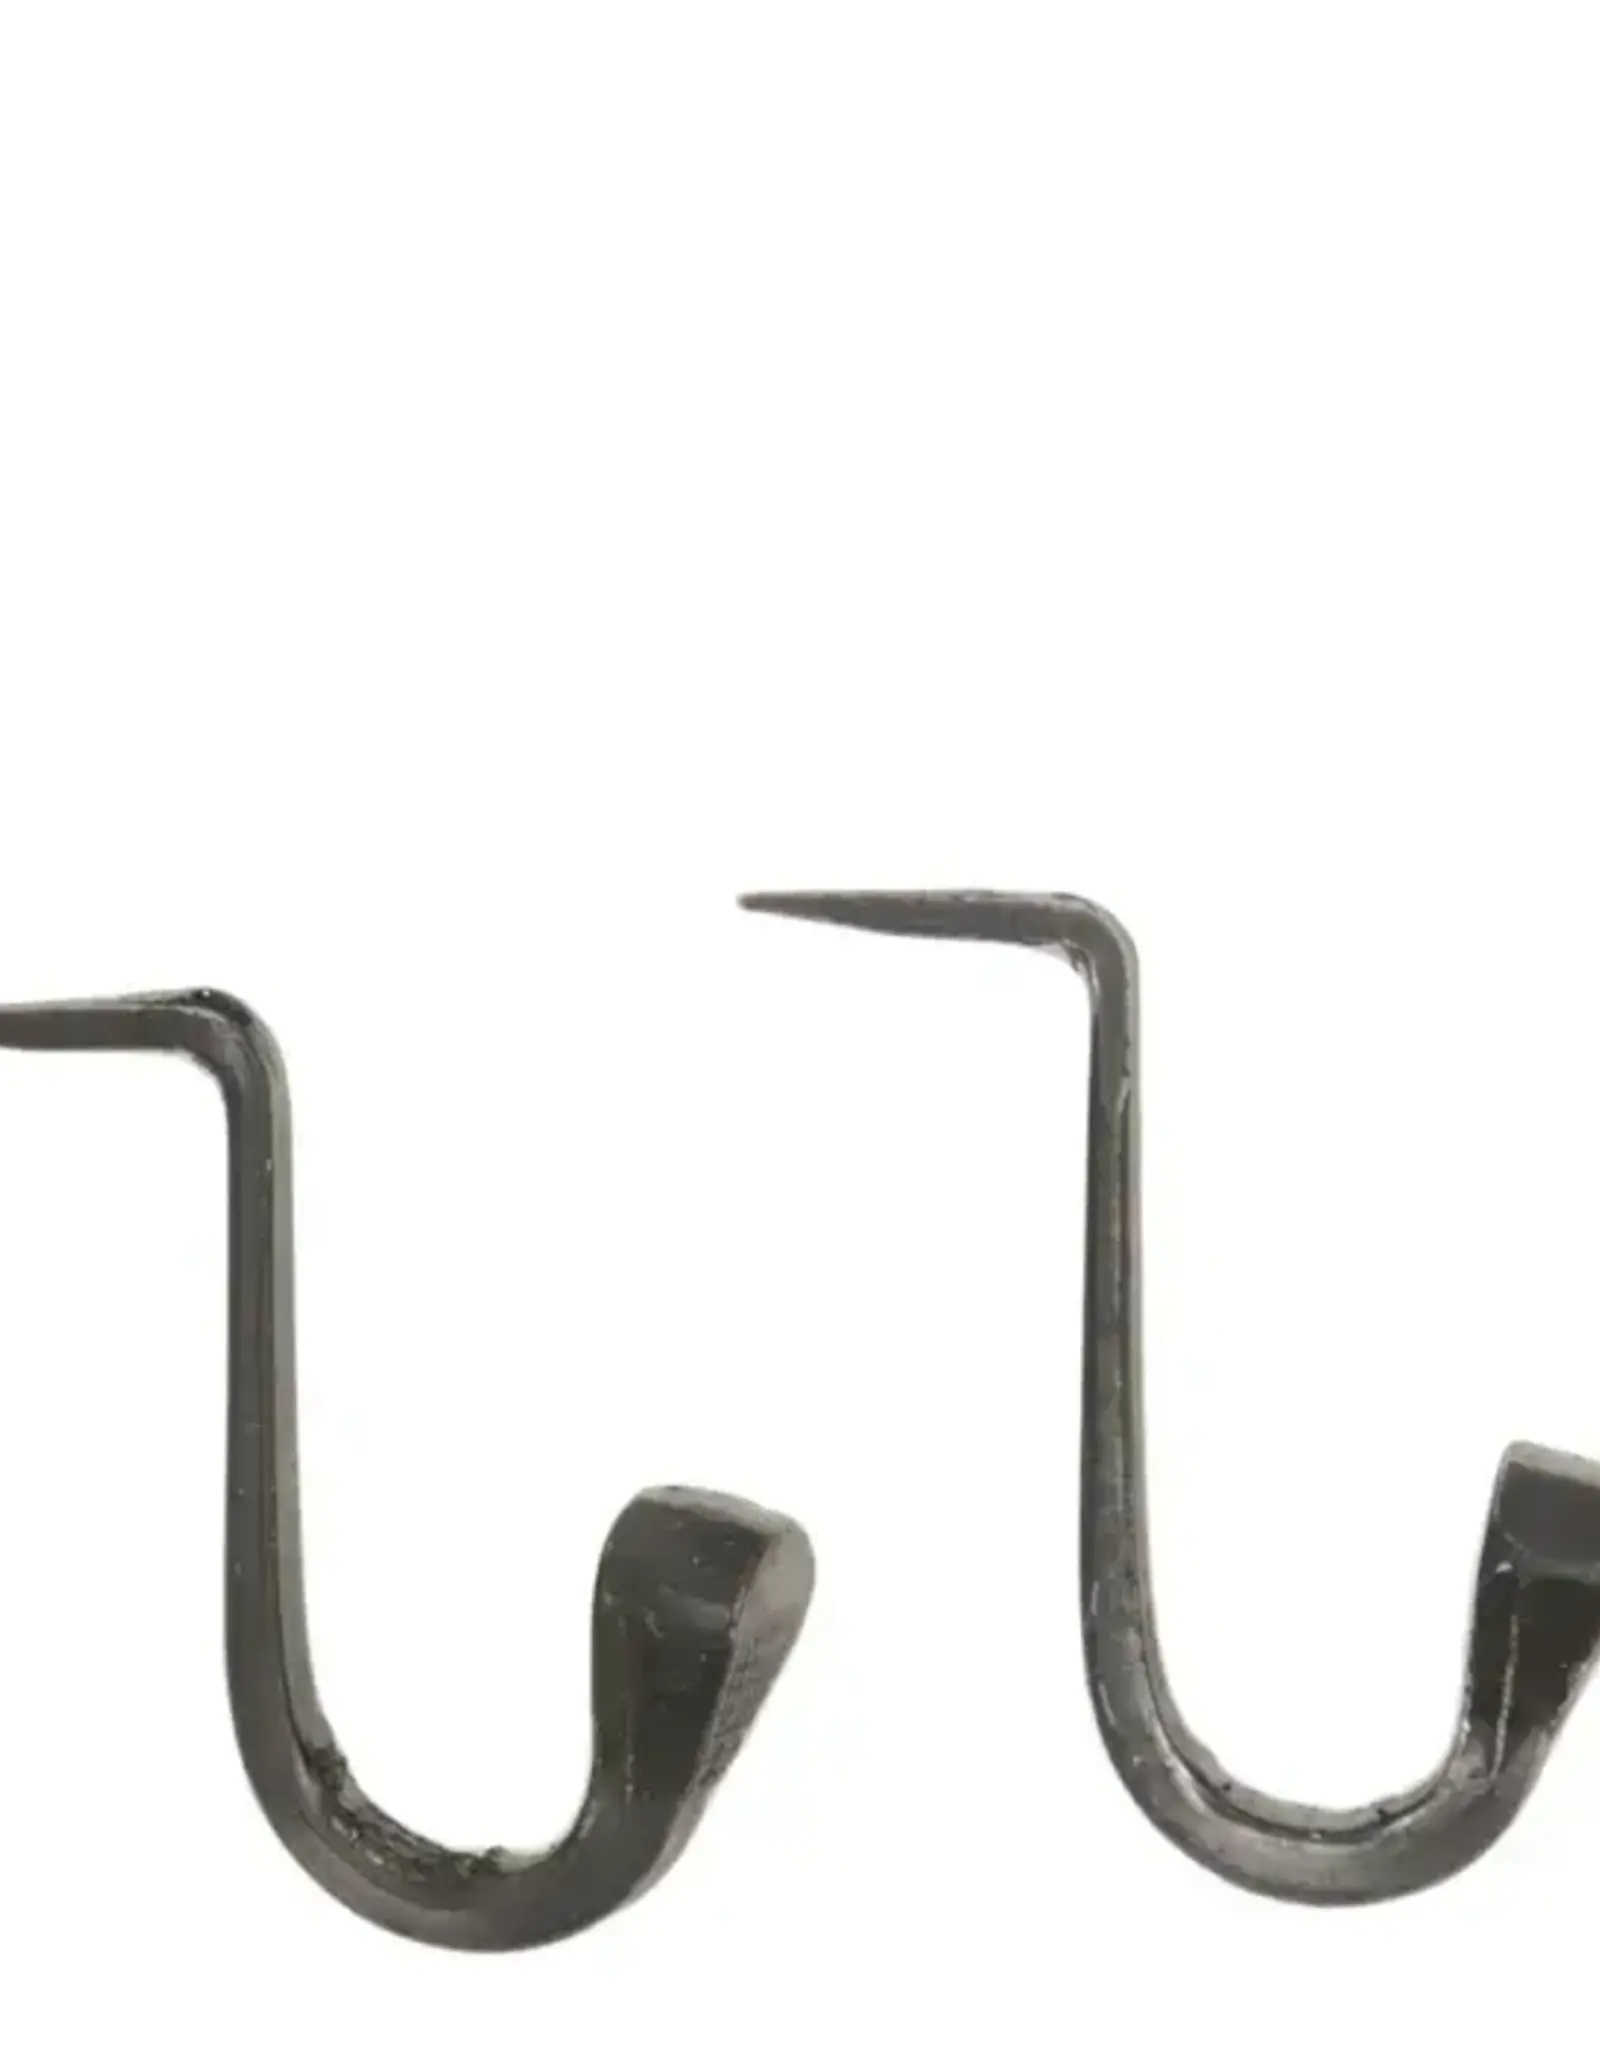 Irvin's Tinware Wrought Iron Nail Hook, Small